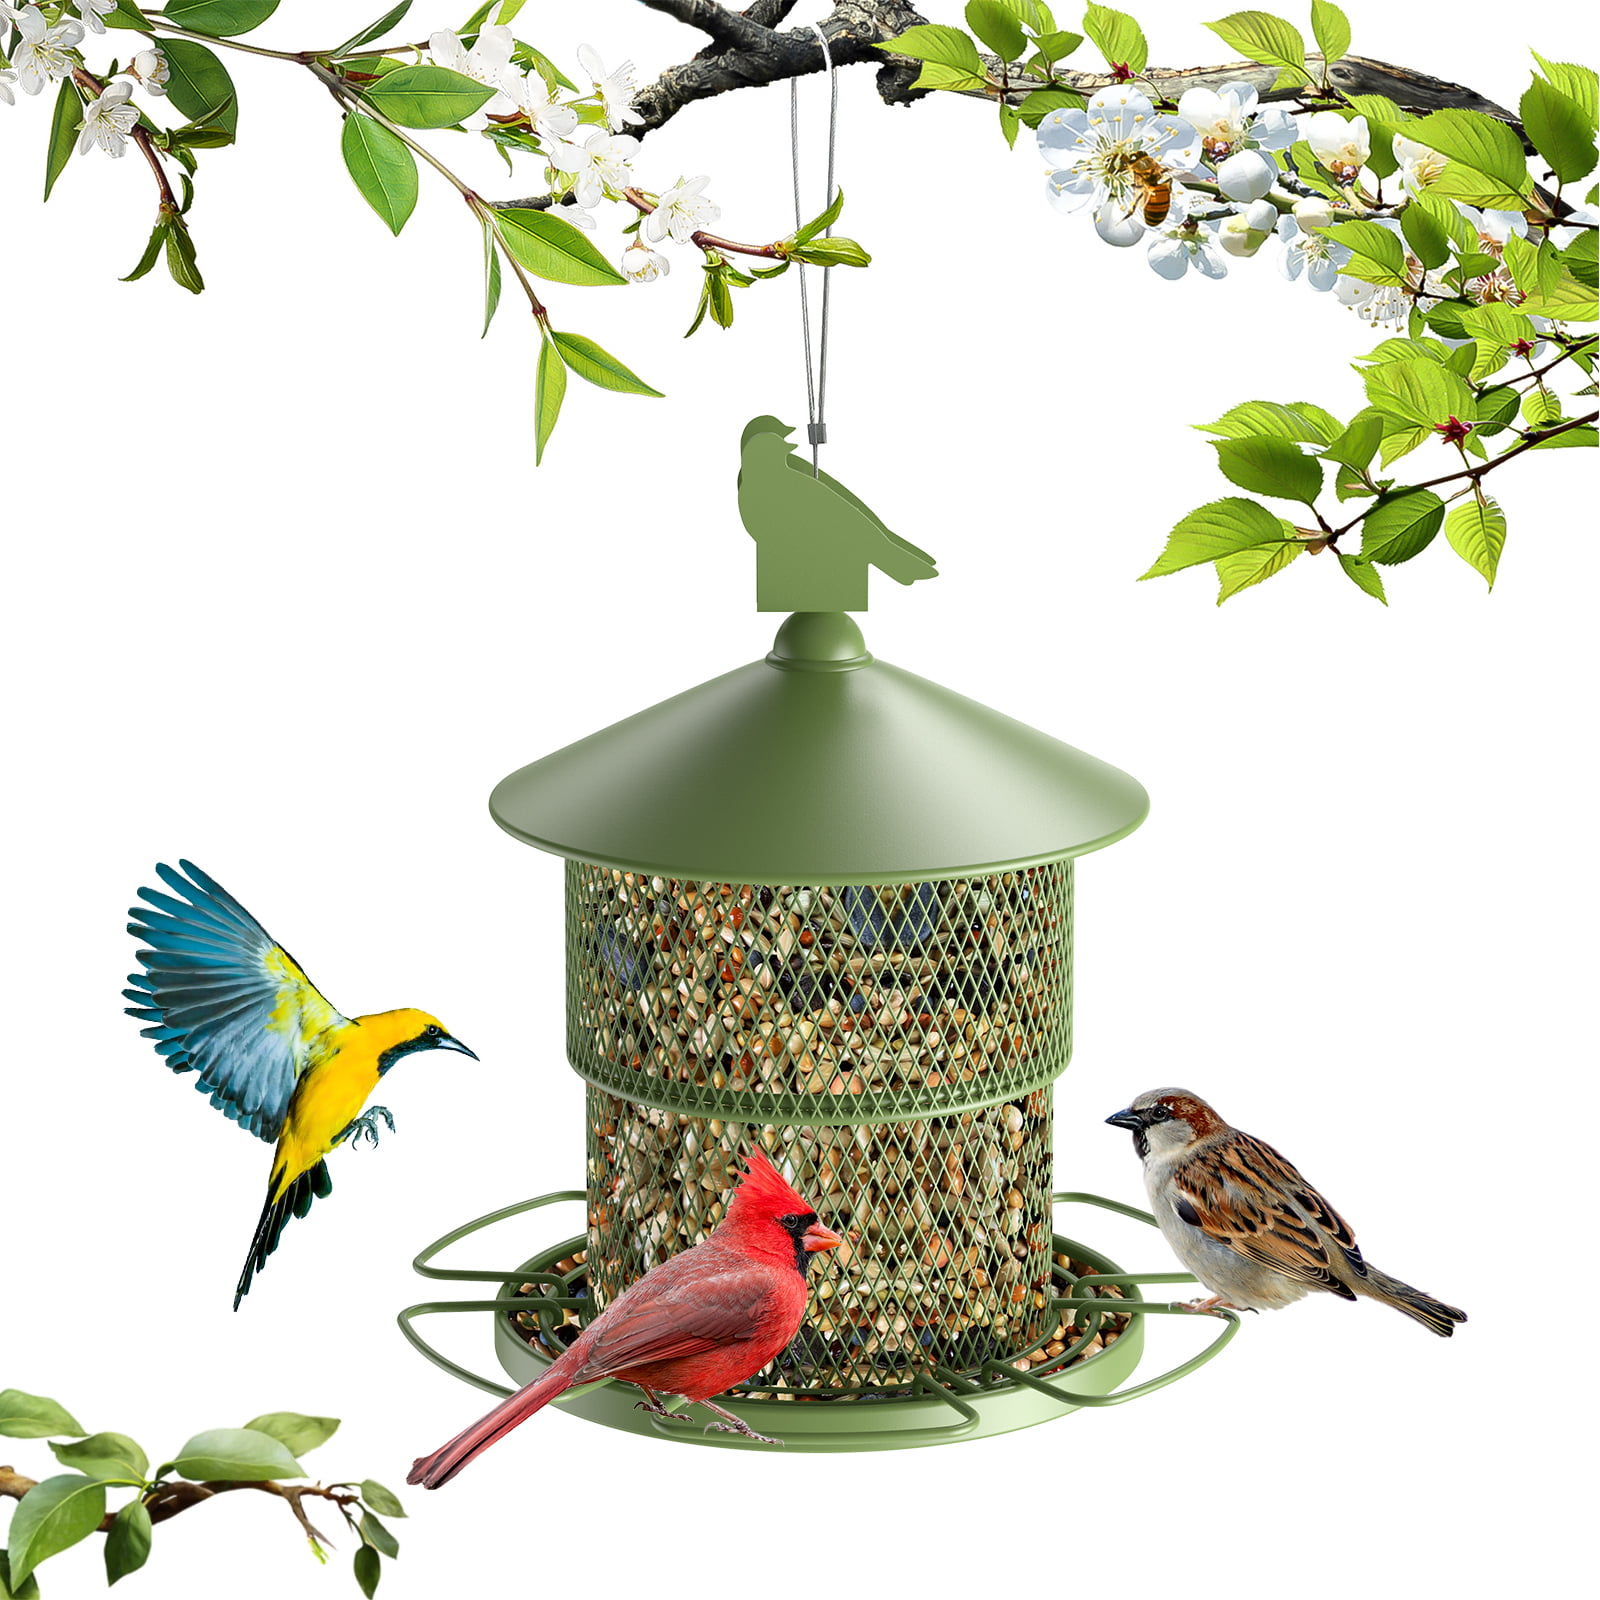 Ground Bird Feeder Tray for Feeding Birds That Feed Off The Ground Durable and Large Platform Bird Feeder Dish Size 10.75 x 10.75 x 2.5 inches